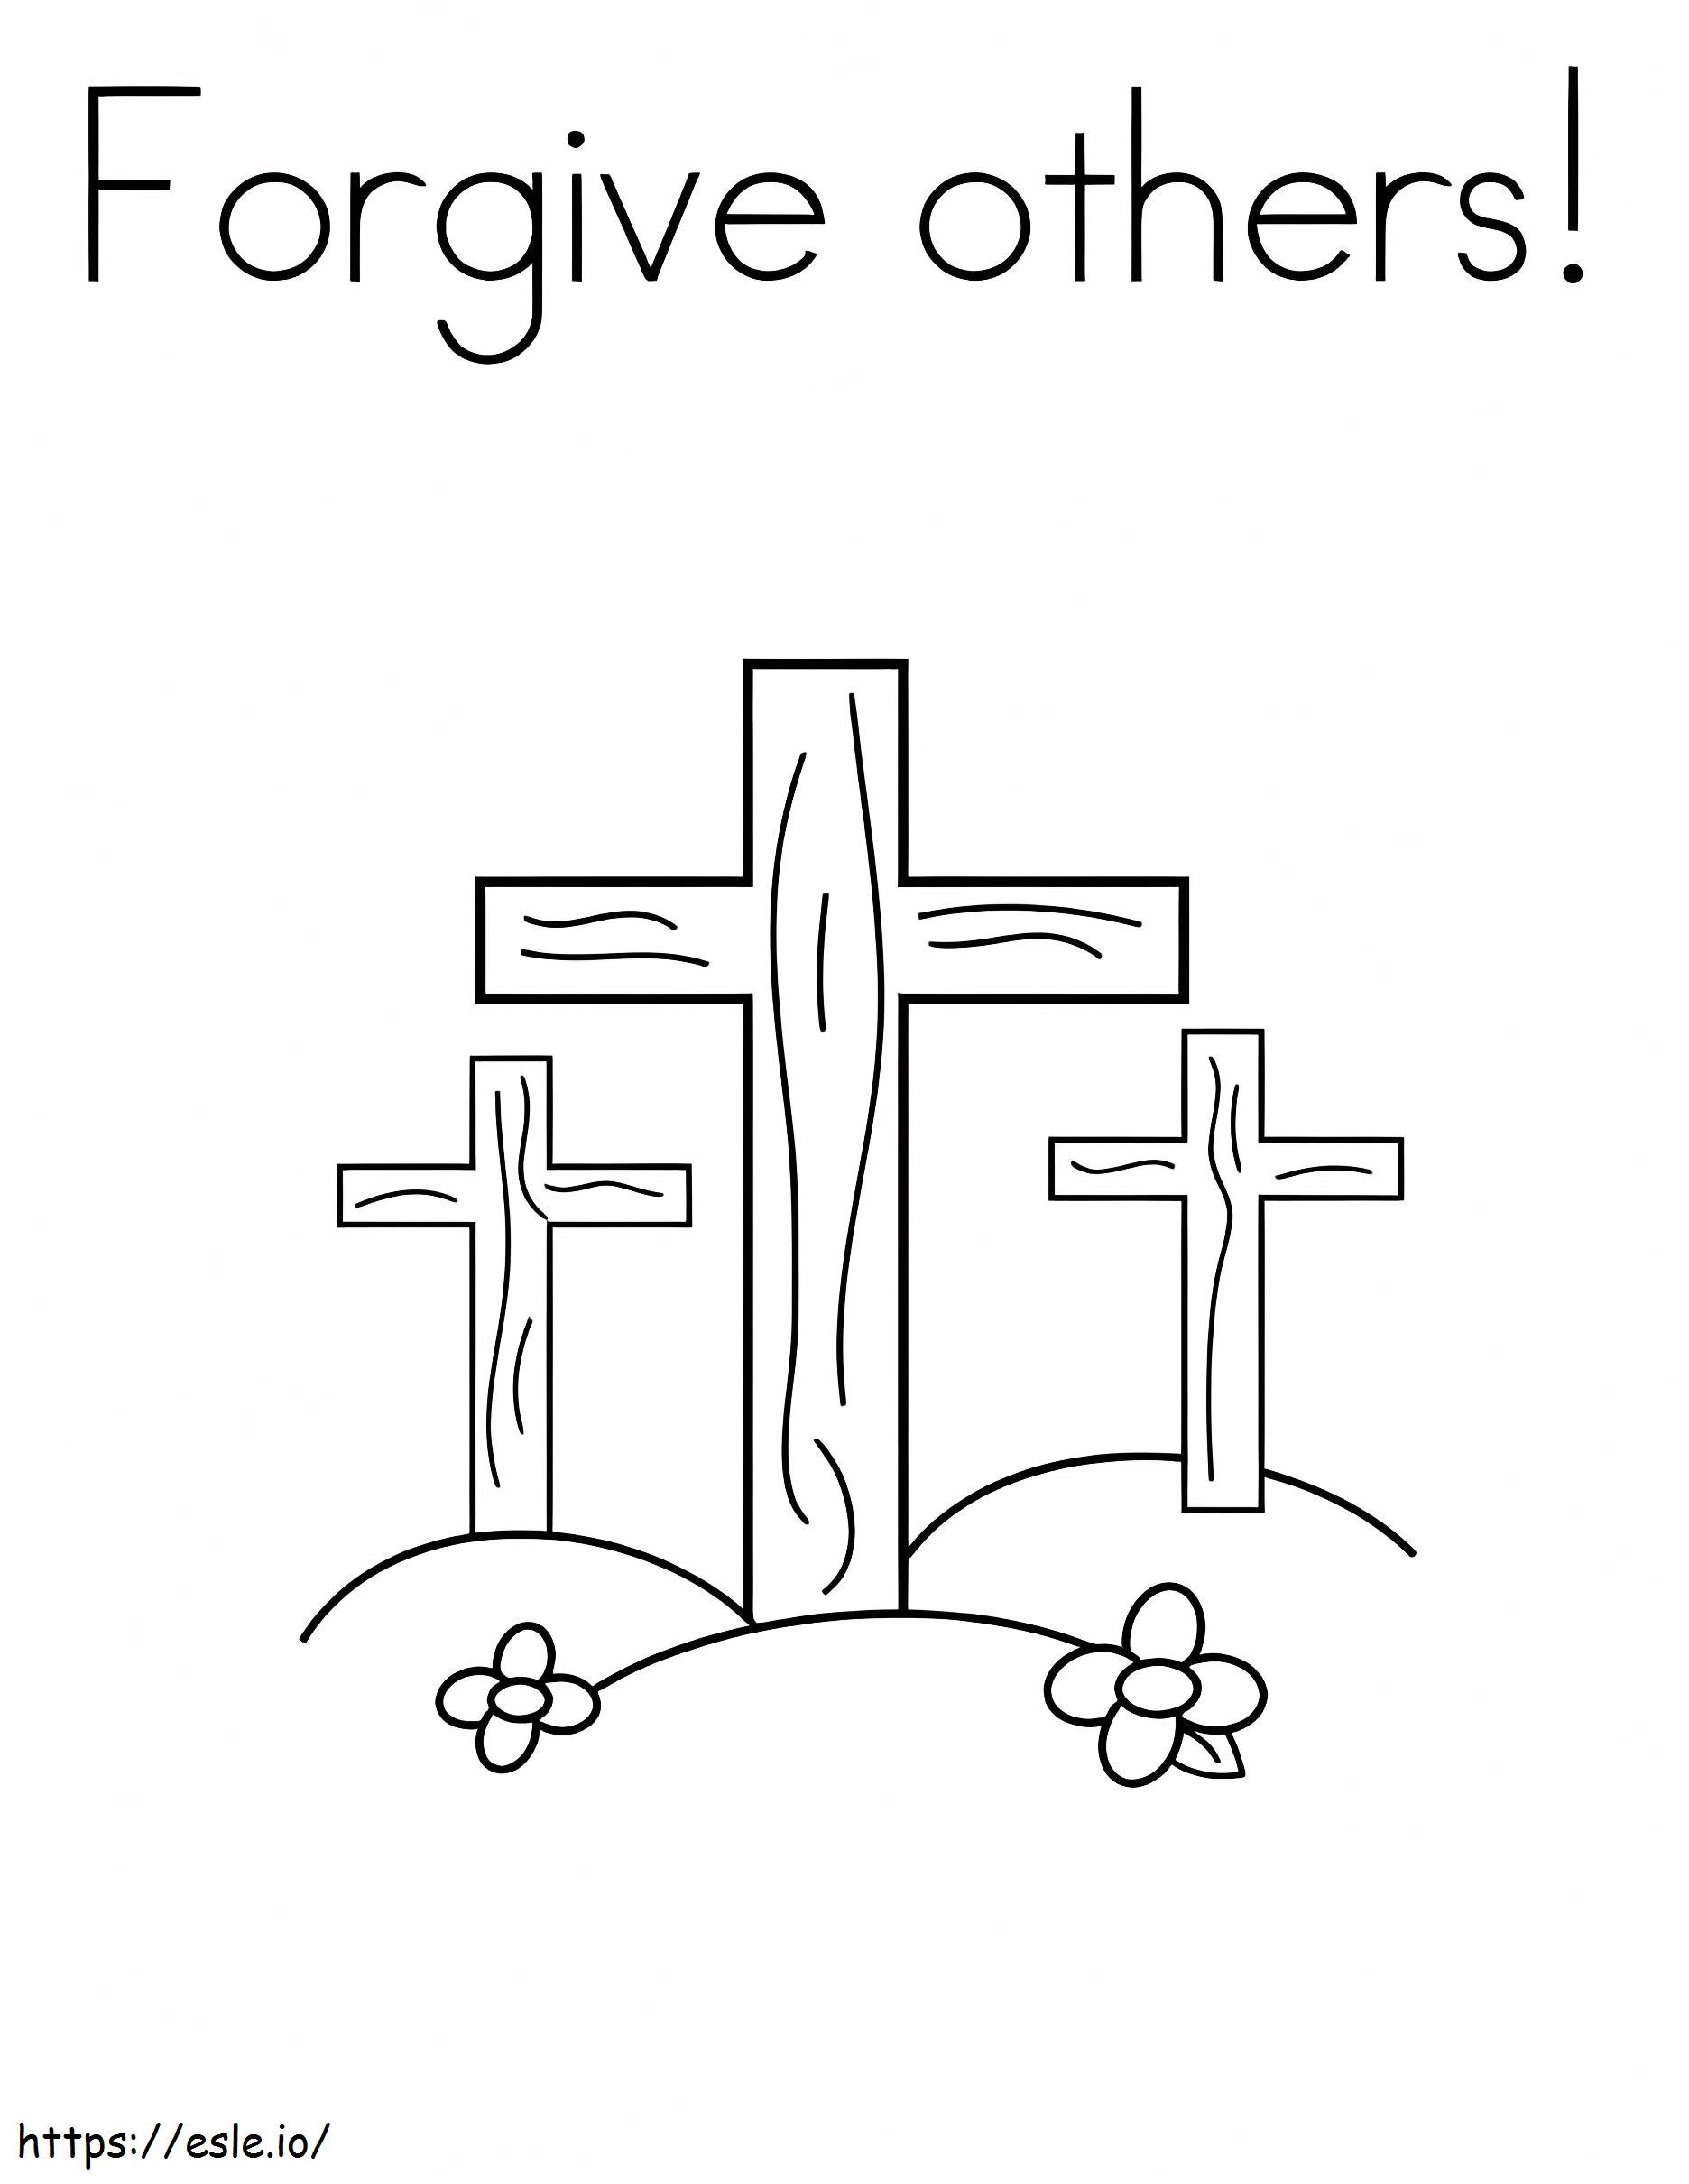 Forgive Others coloring page